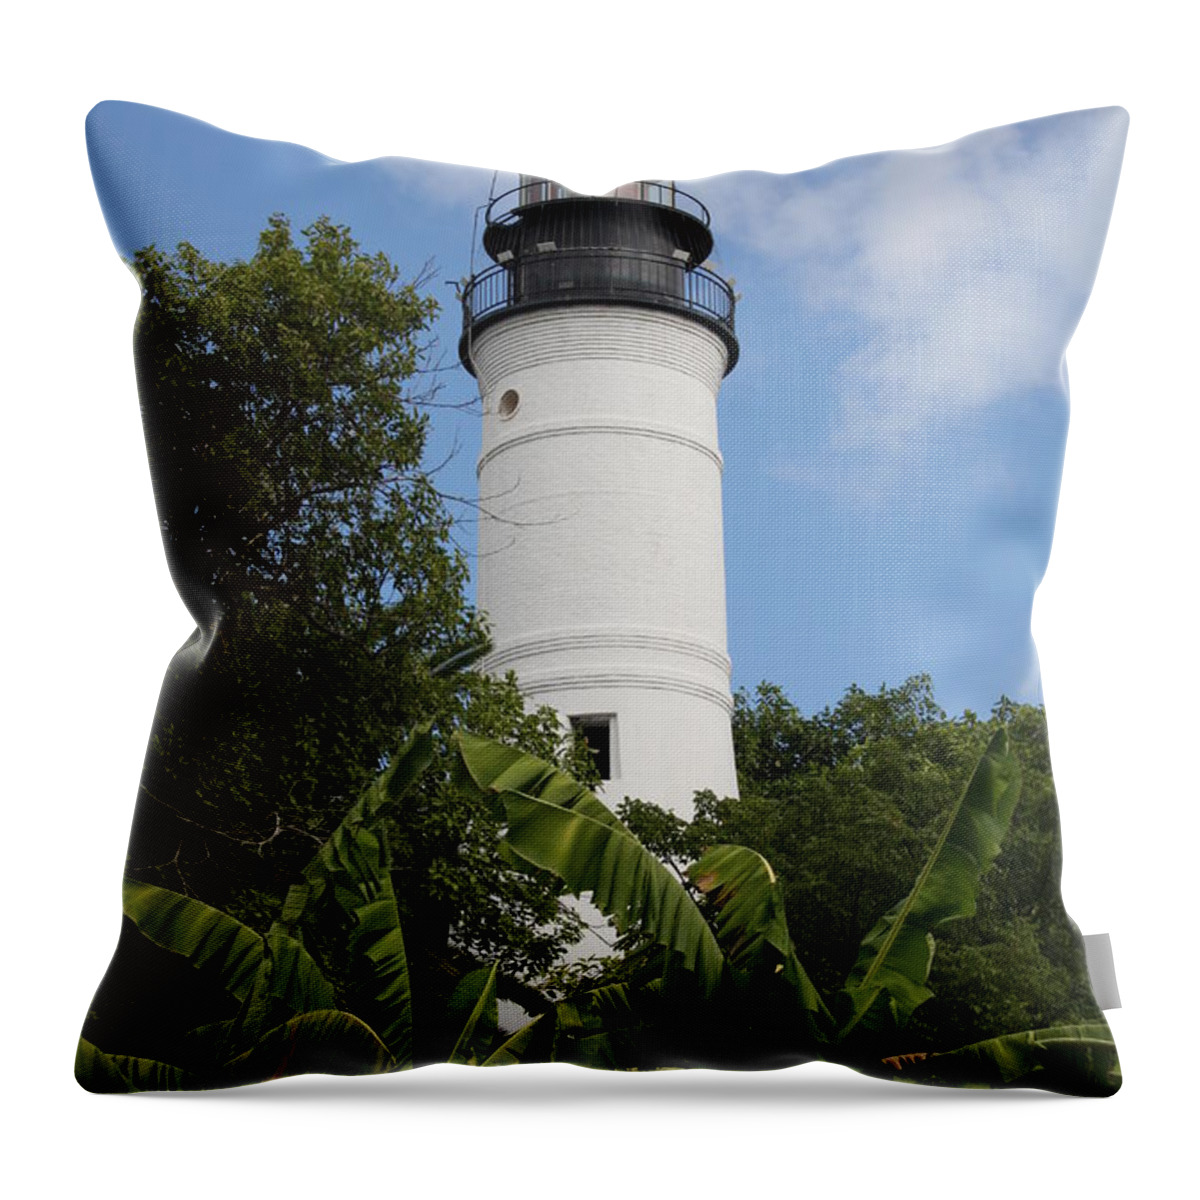 Ligthouse Throw Pillow featuring the photograph Key West Lighthouse by Christiane Schulze Art And Photography